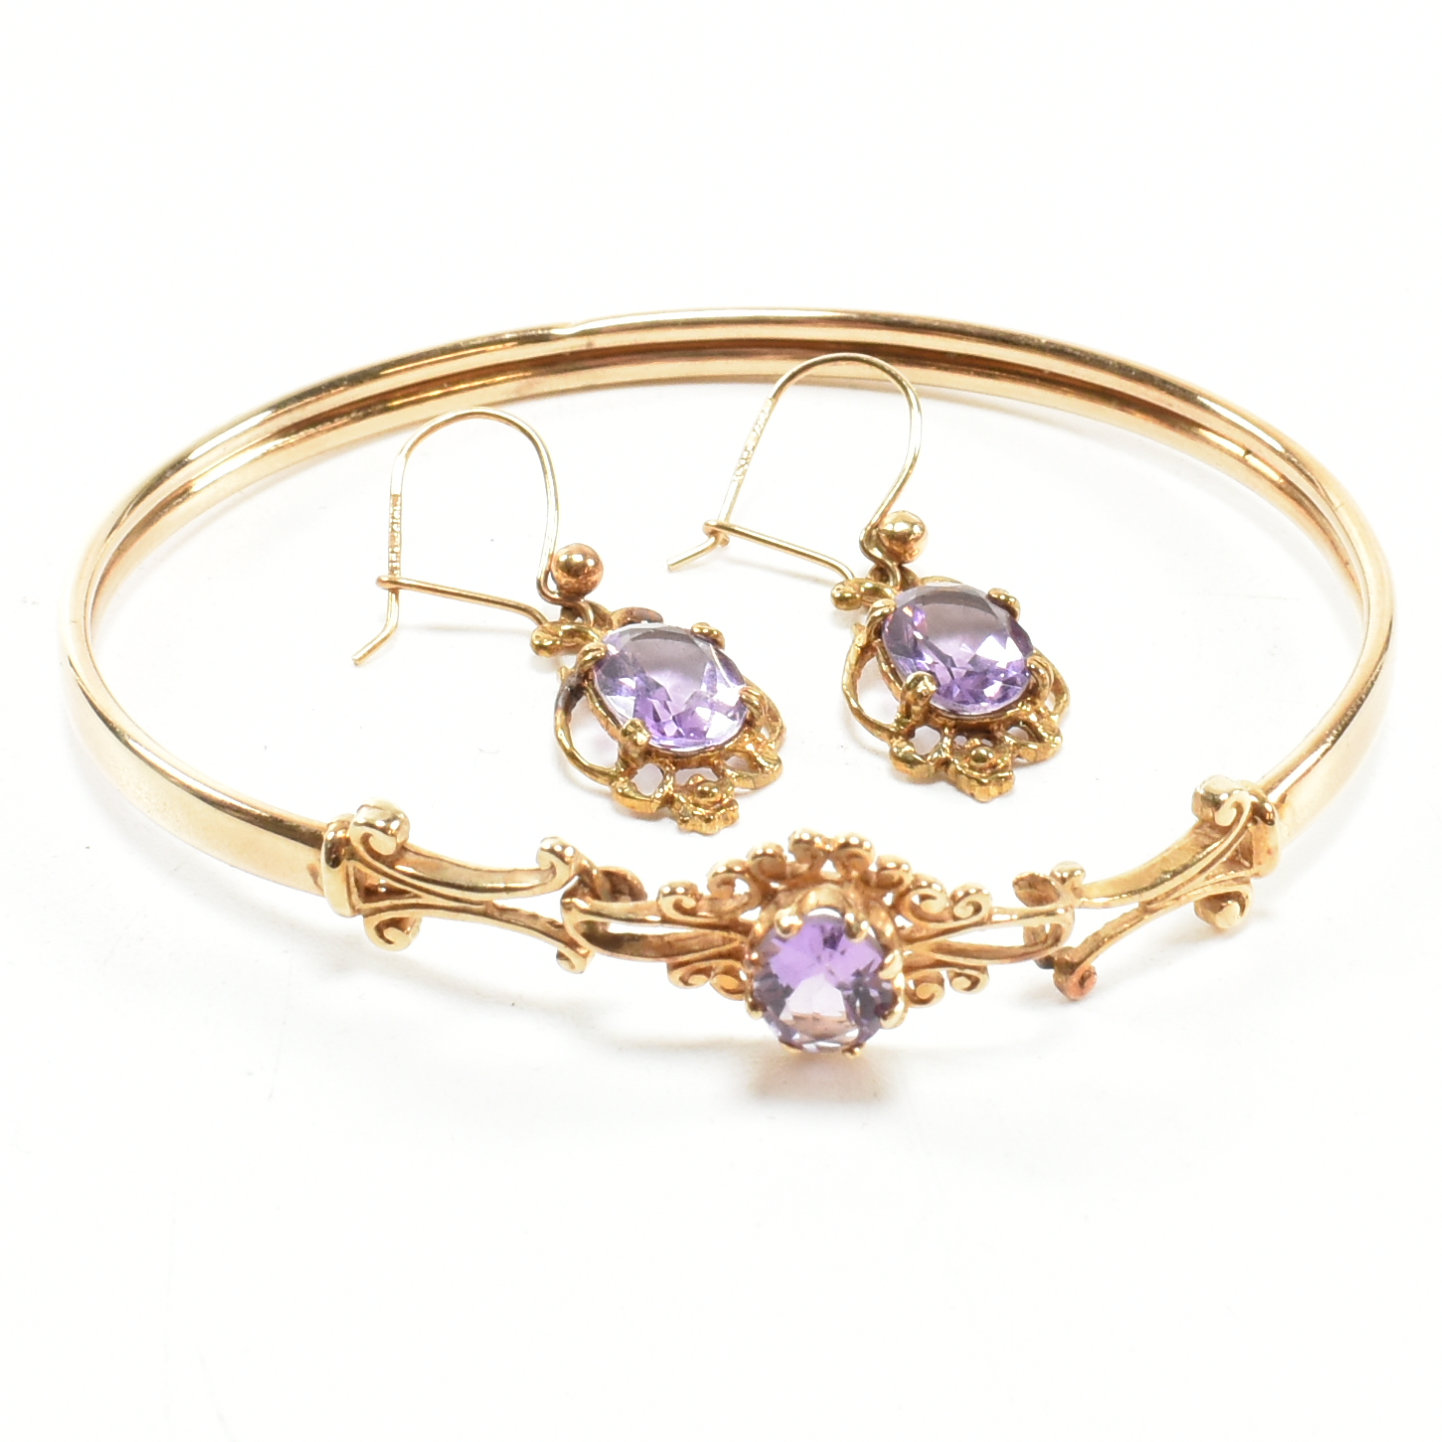 VICTORIAN STYLE HALLMARKED 9CT GOLD & AMETHYST BANGLE & EARRING SET